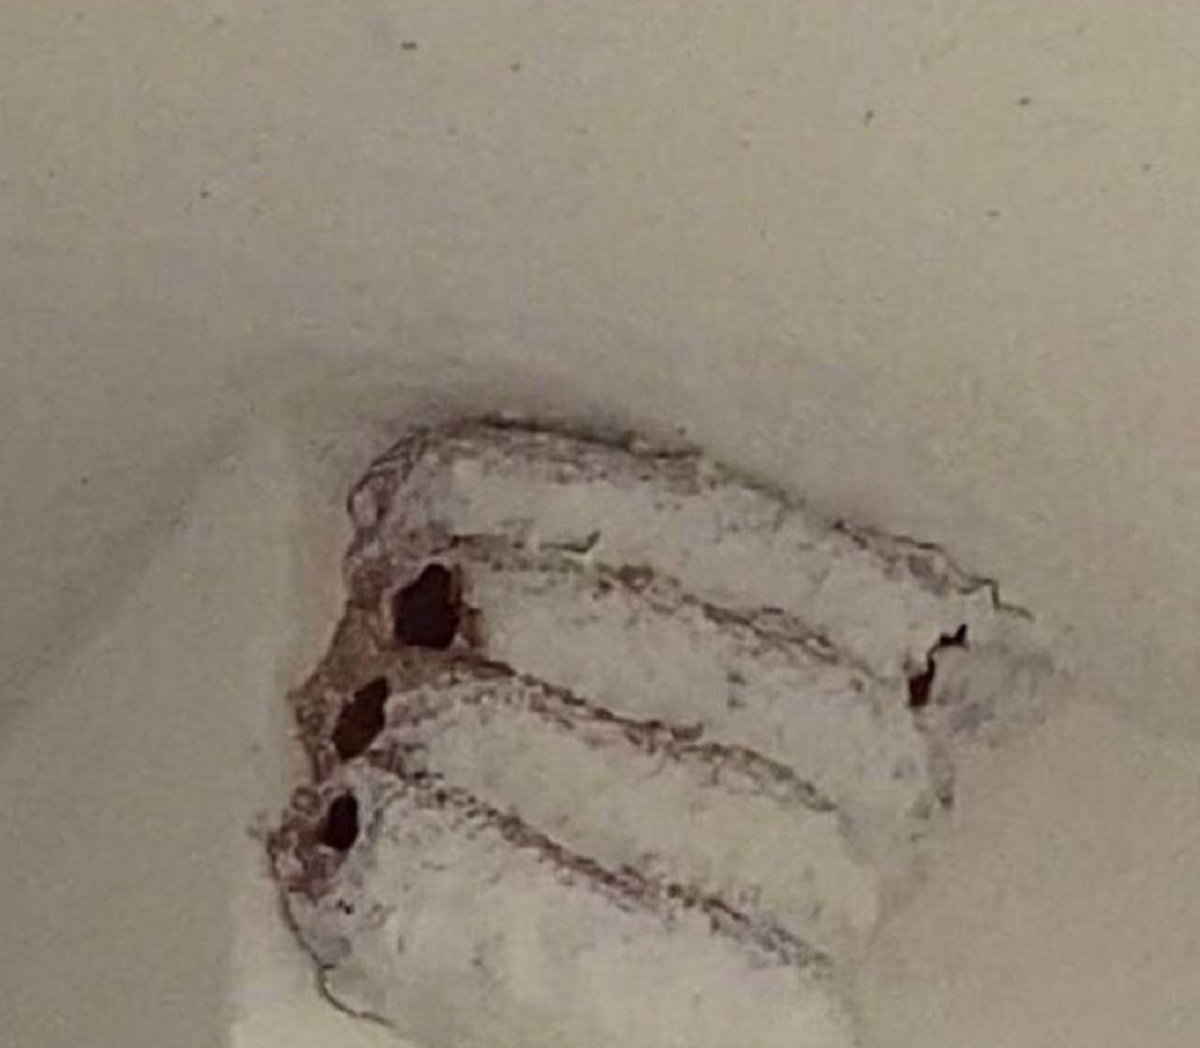 Just moved into a new build and the landlord straight up just painted over a couple of wasp nests in my closet.